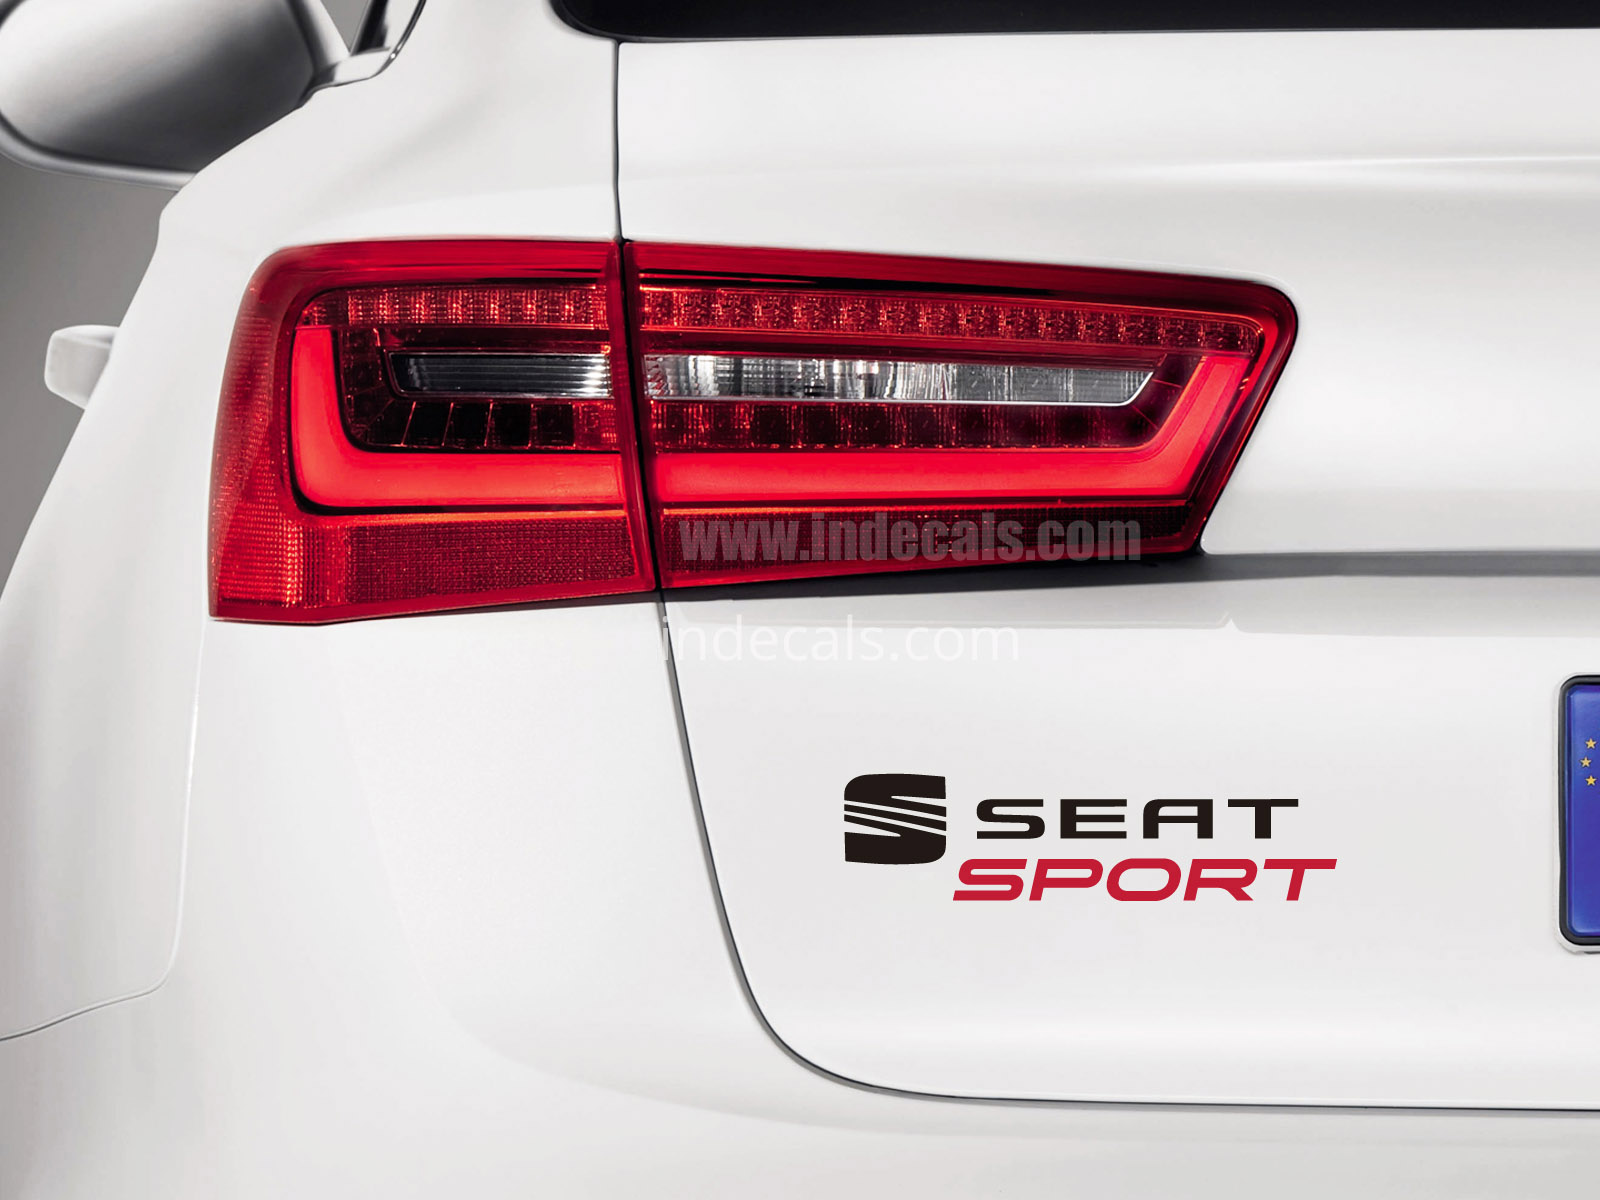 1 x Seat Sports Sticker for Trunk - Black & Red